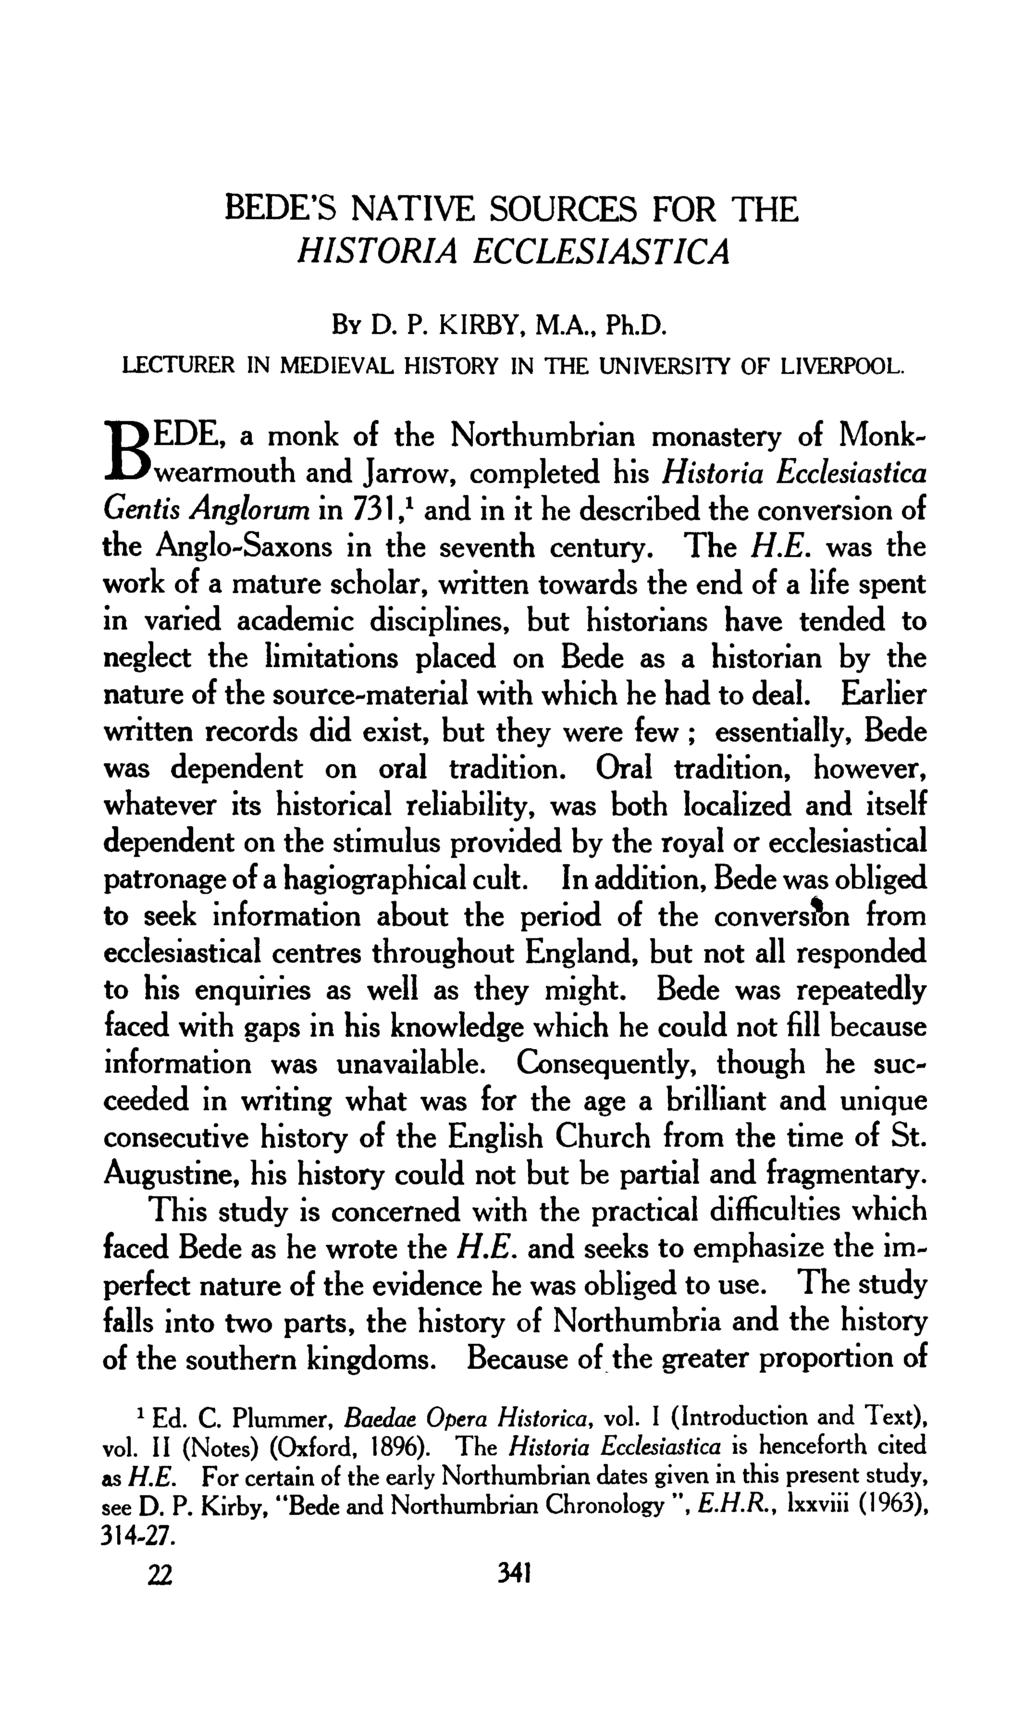 BEDE'S NATIVE SOURCES FOR THE HISTORIA ECCLESIASTICA BY D. P. KIRBY, MA, Ph.D. LECTURER IN MEDIEVAL HISTORY IN THE UNIVERSITY OF LIVERPOOL.